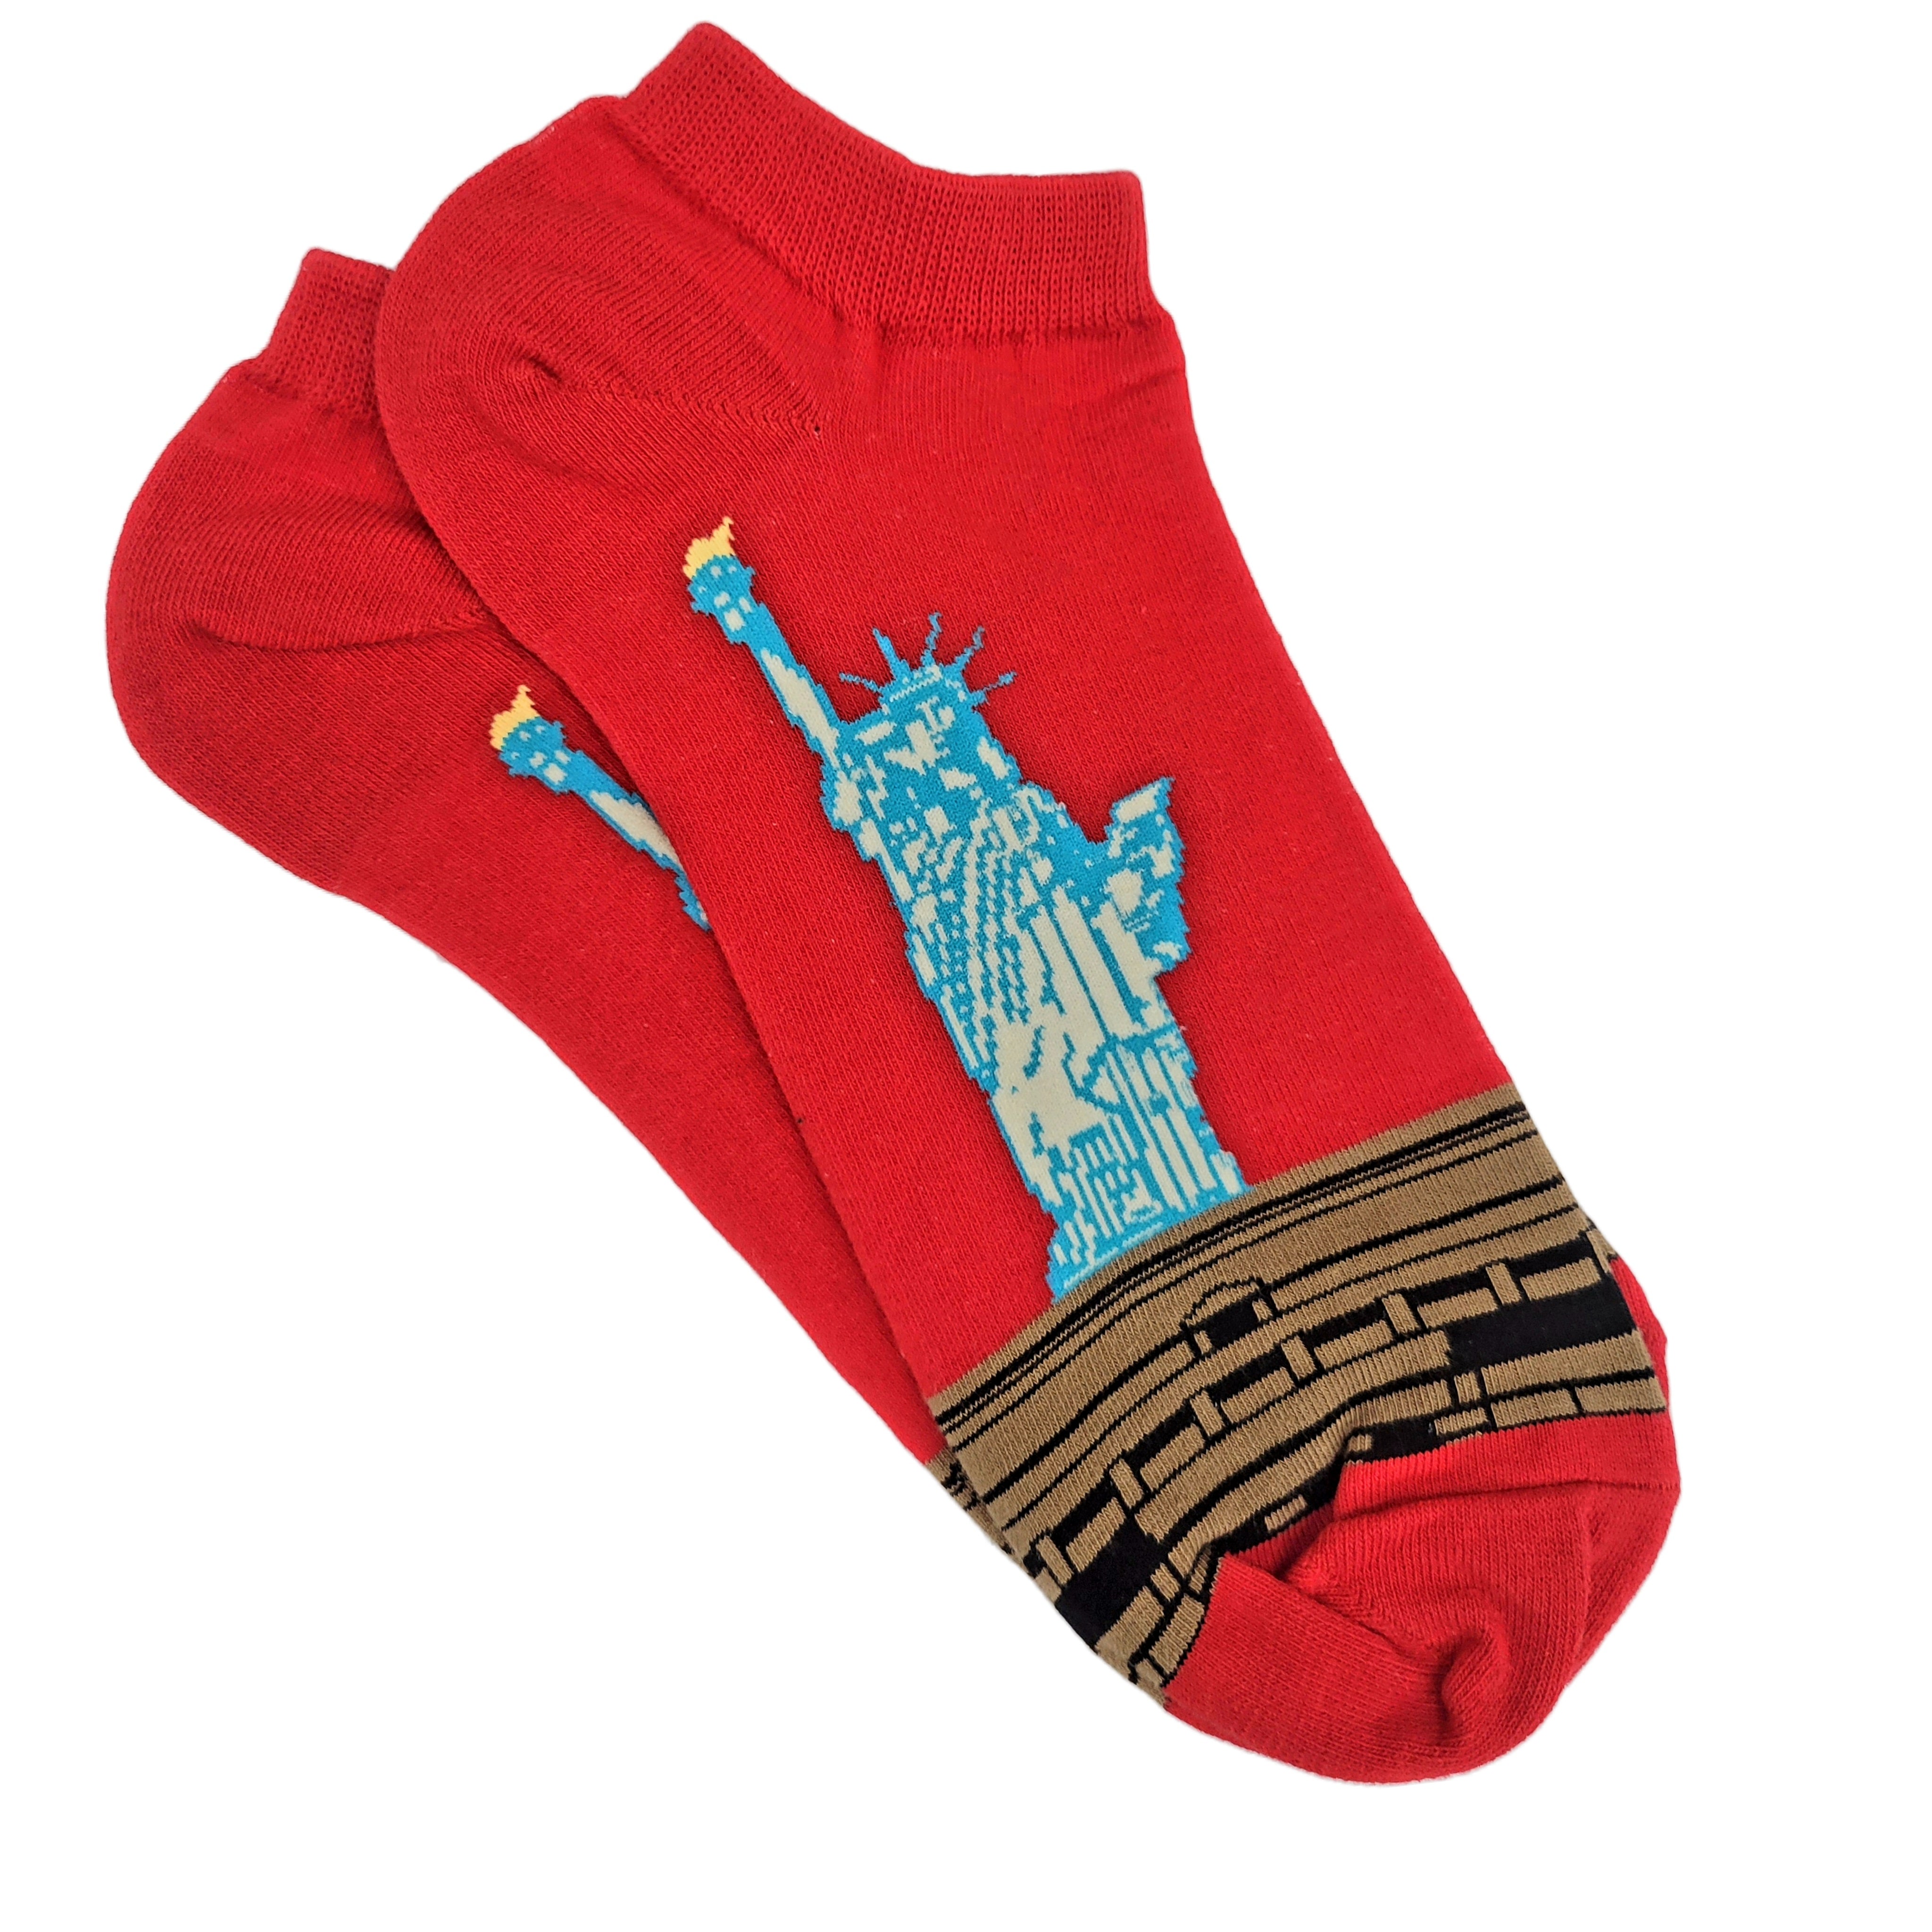 Statue of Liberty Ankle Socks